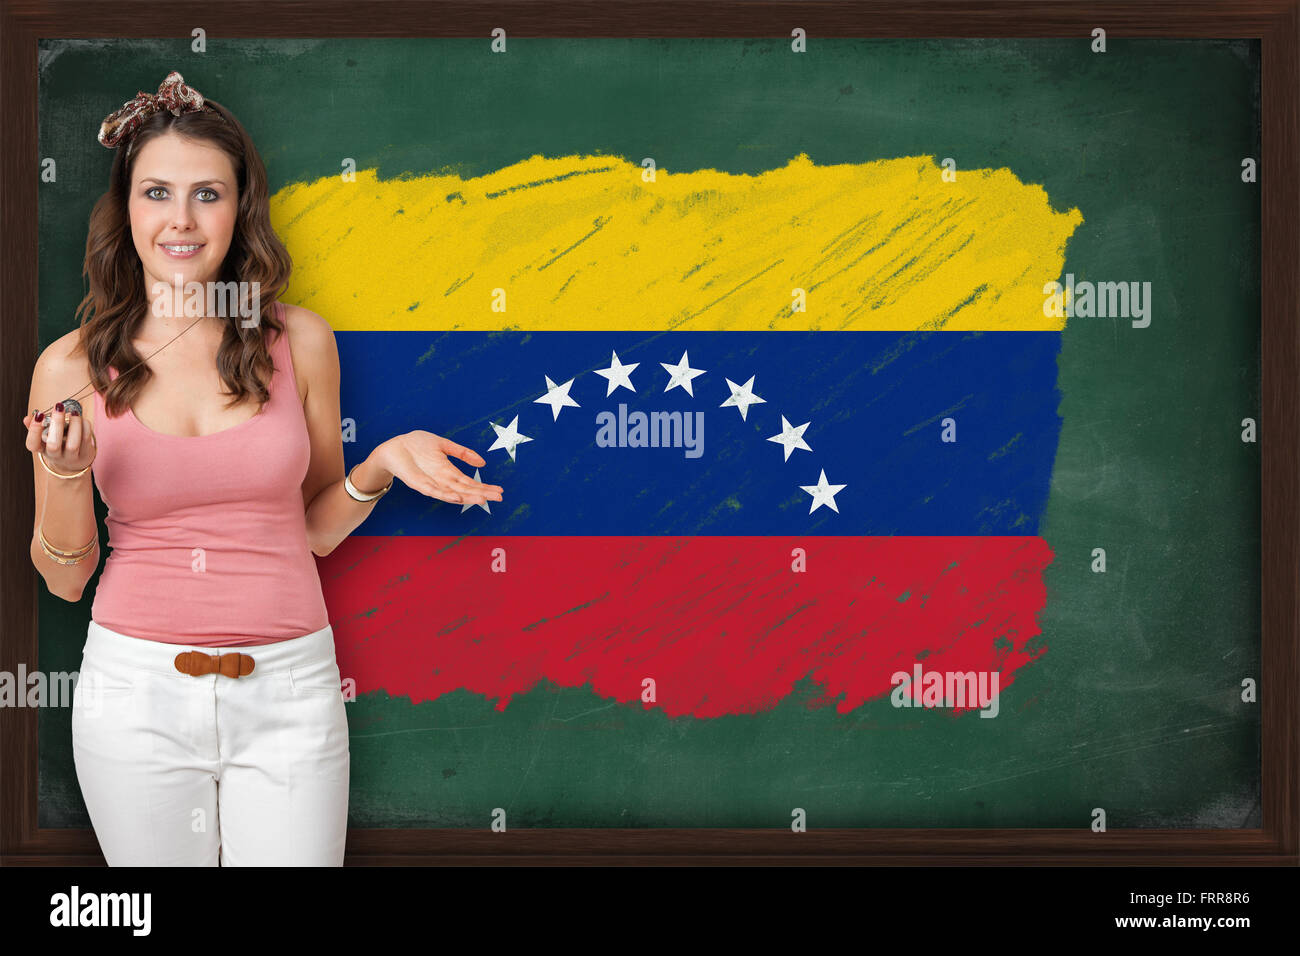 Beautiful and smiling woman showing flag of XXXXXXX on blackboard ...